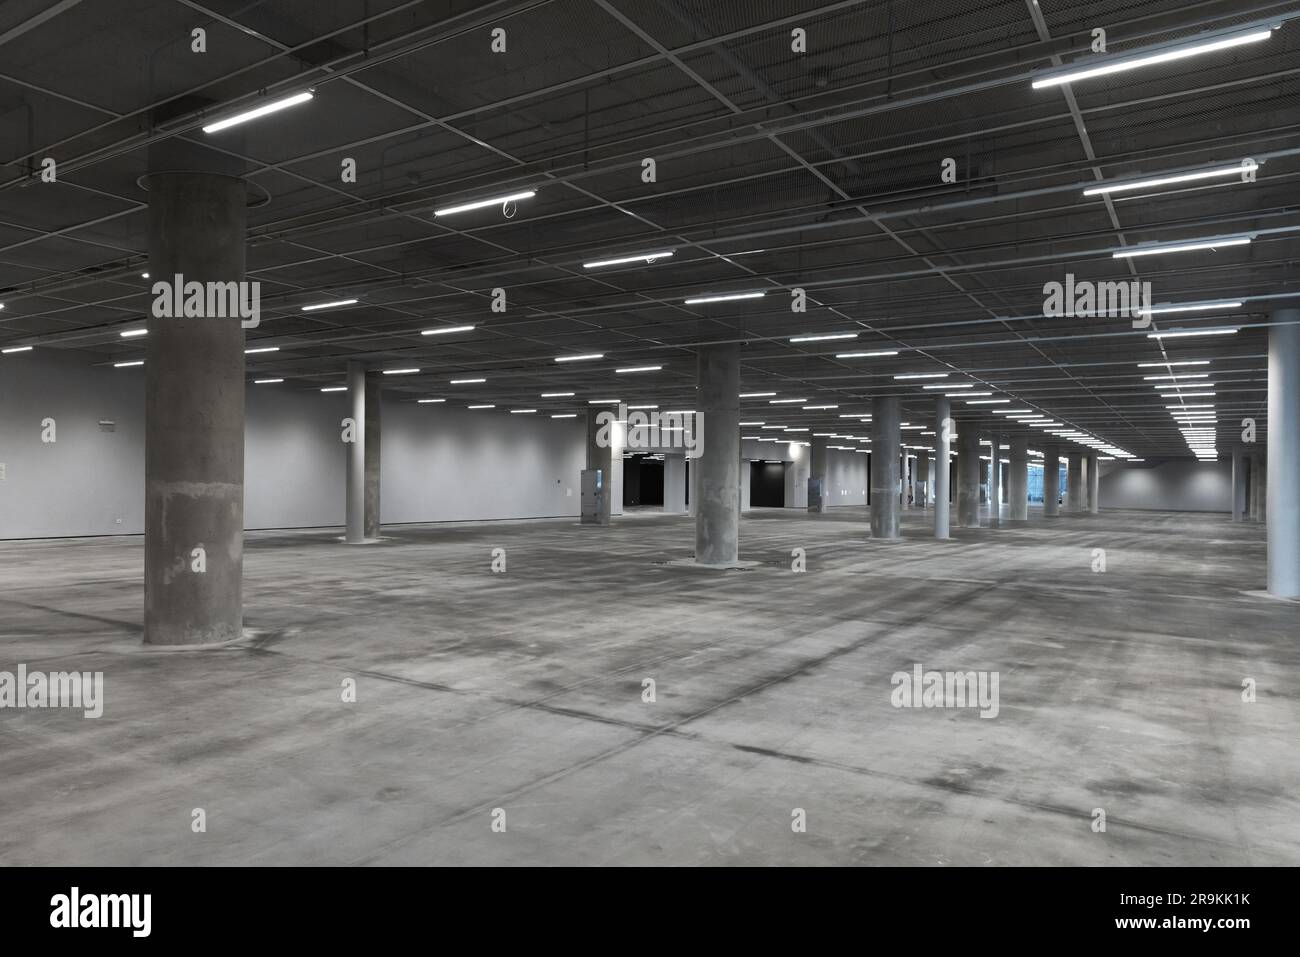 Abstract empty parking interior with concrete pillars and neon lights, modern architecture background photo Stock Photo